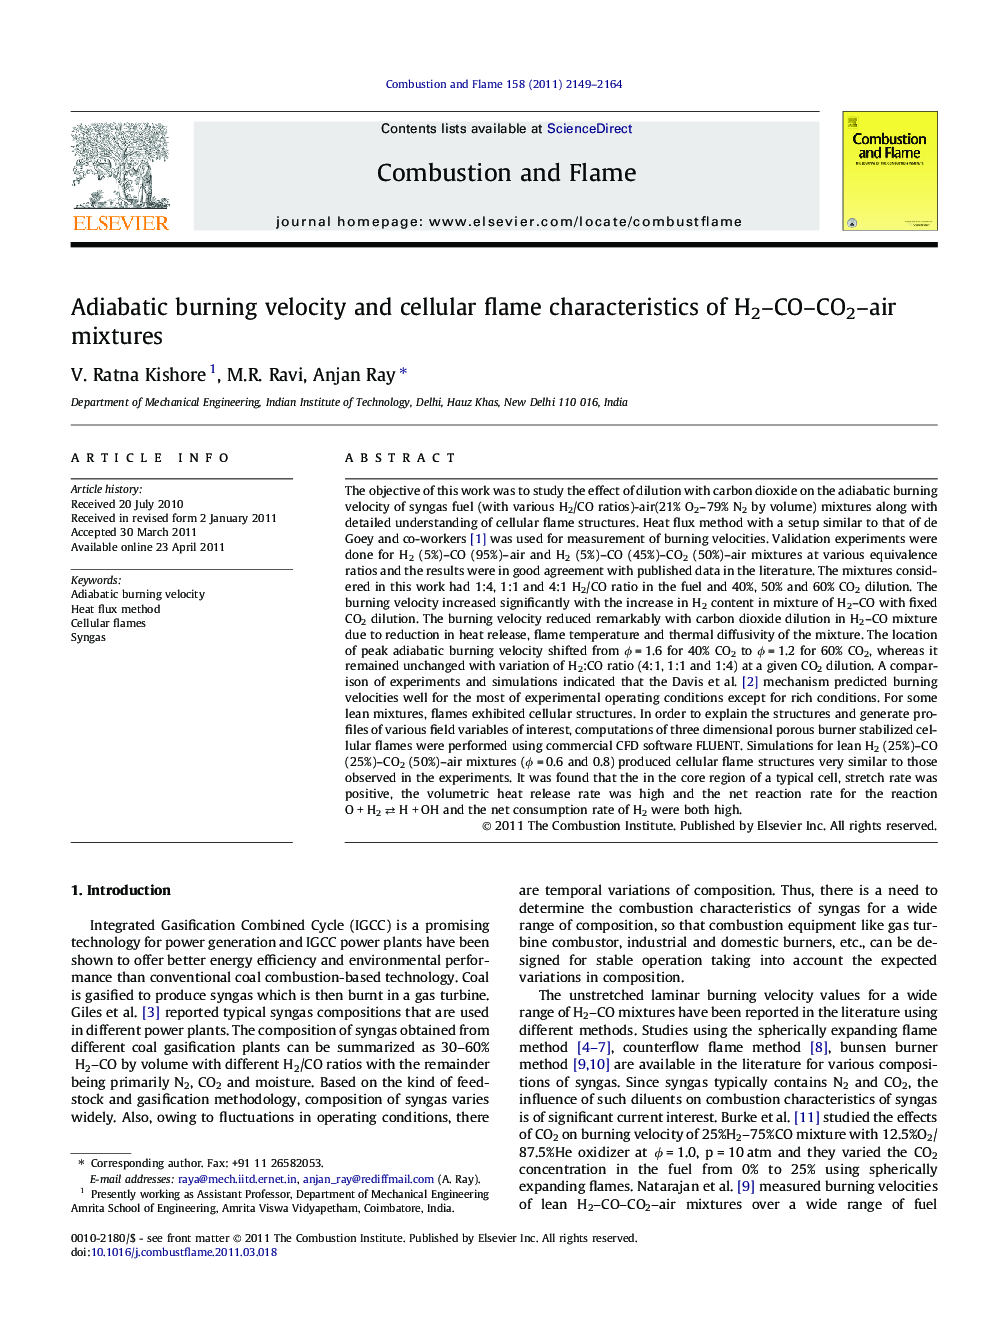 Adiabatic burning velocity and cellular flame characteristics of H2–CO–CO2–air mixtures